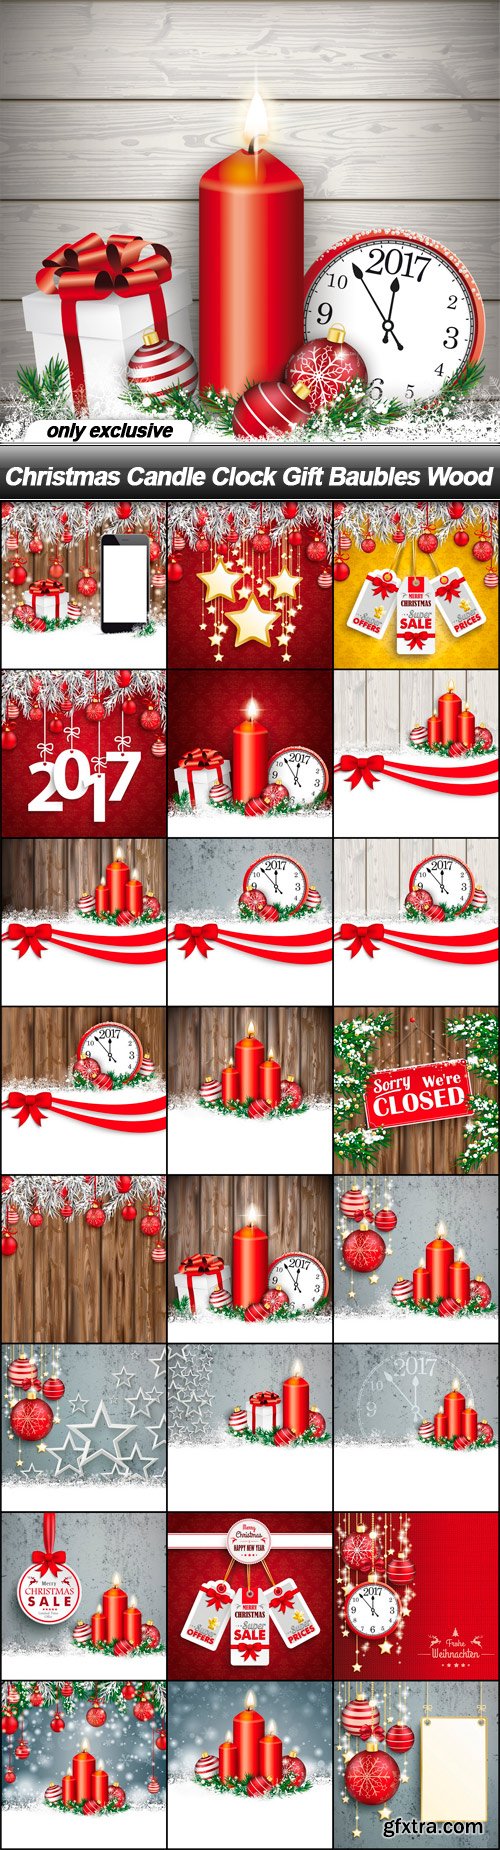 Christmas Candle Clock Gift Baubles Wood - 25 EPS